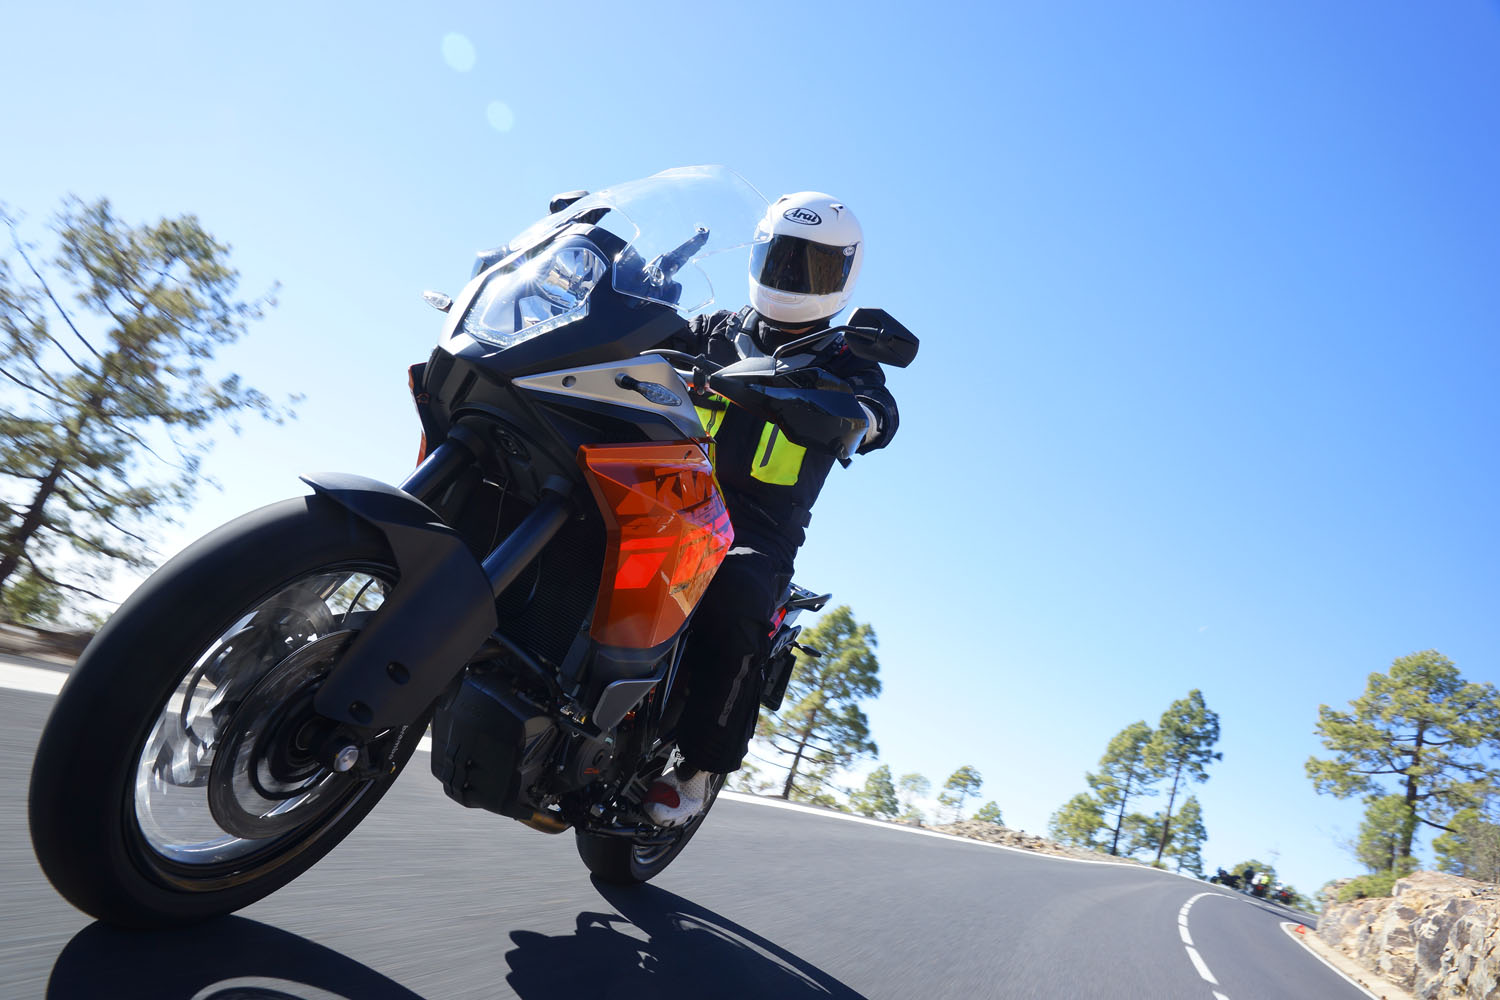 First Ride: KTM 1190 Adventure review